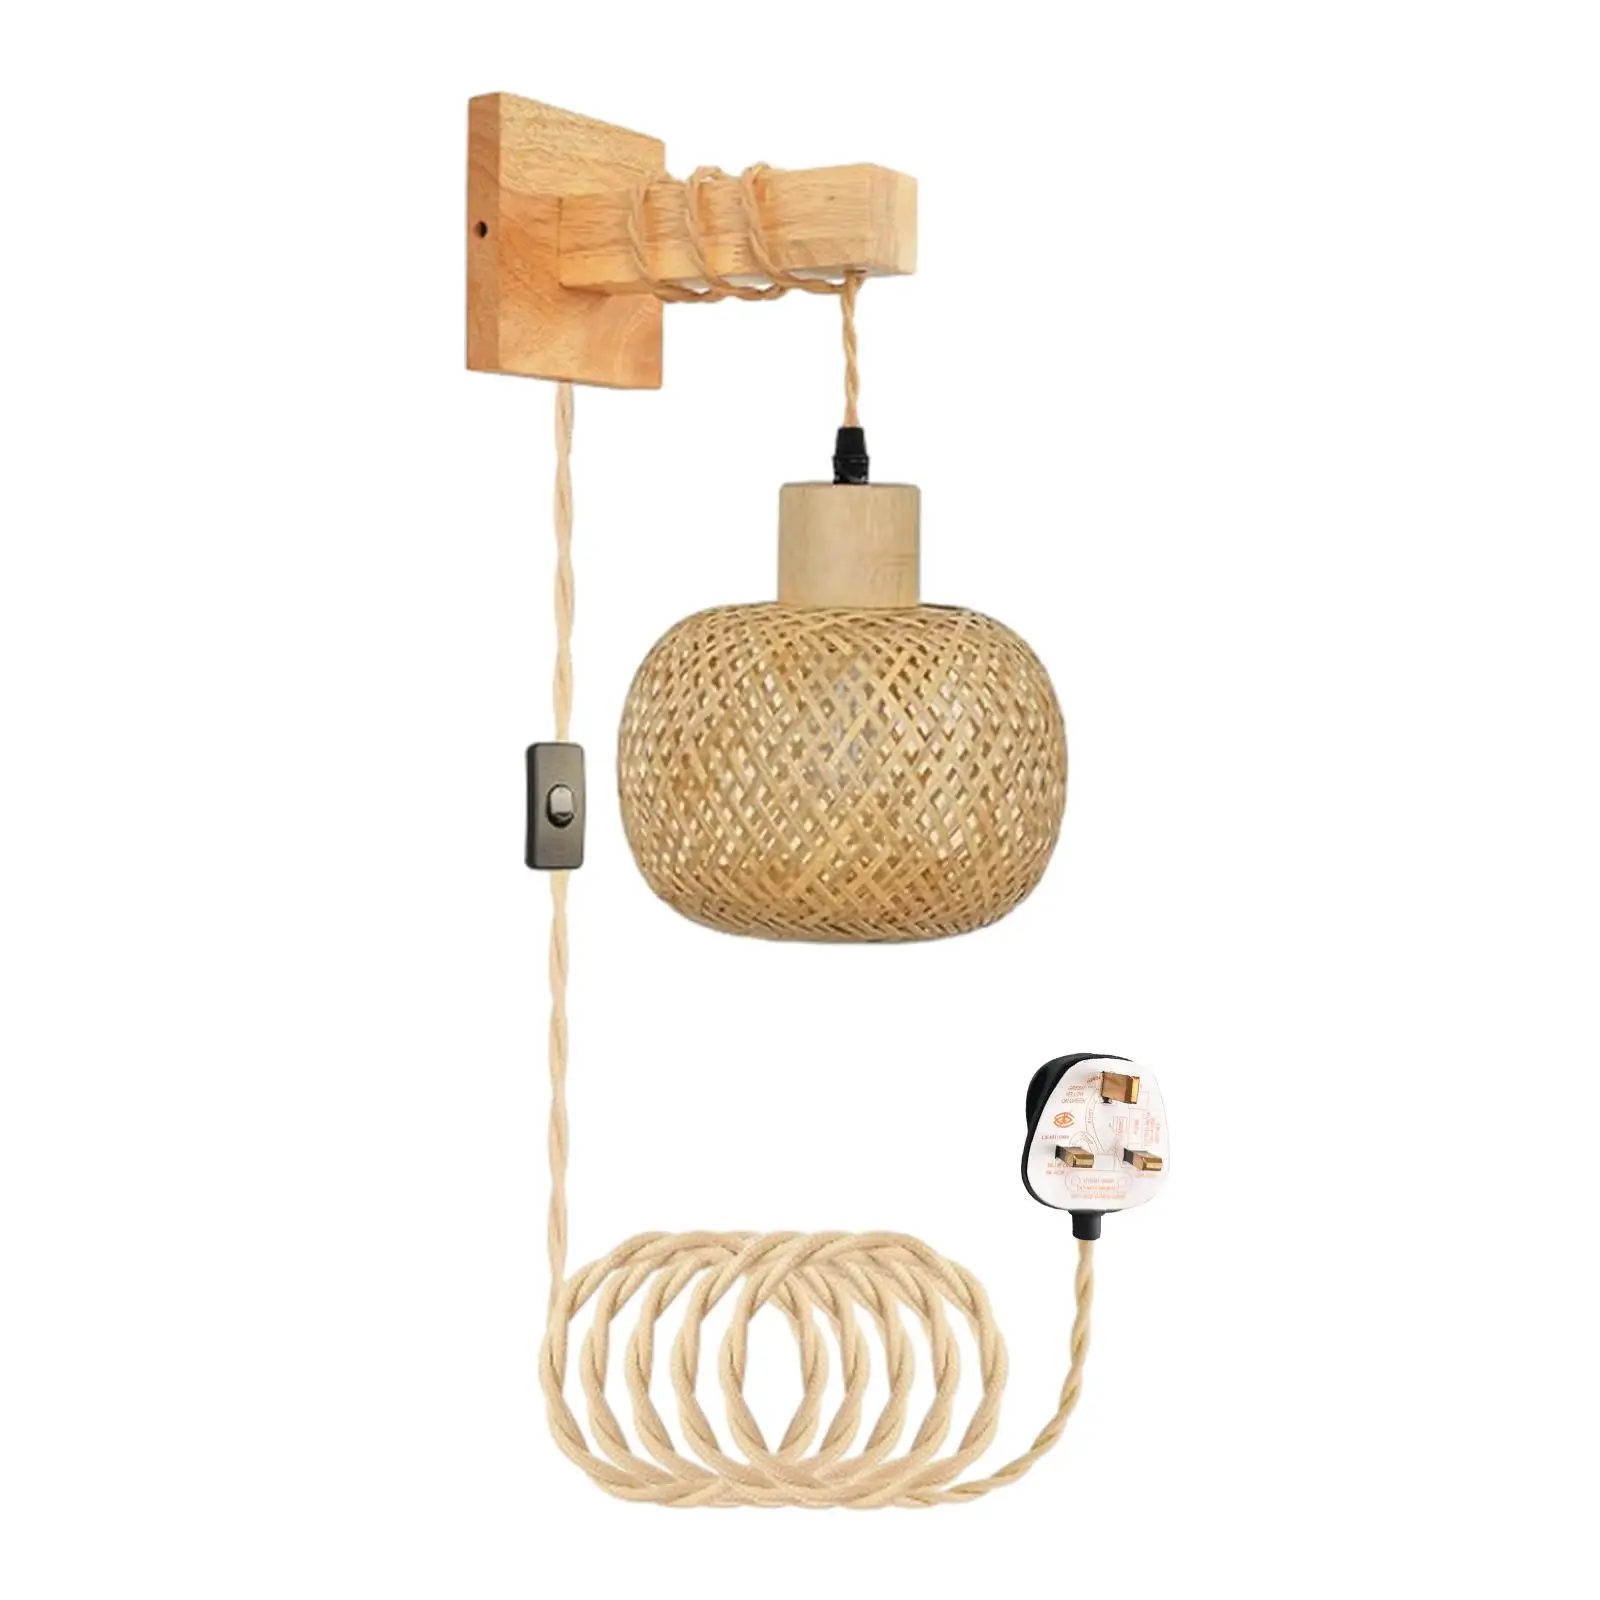 Wall Sconce E26 Base Hand Woven Boho Decor Bedside Light Fixture Plug in Pendant Light for Reading Kitchen Stairs Home Corridor